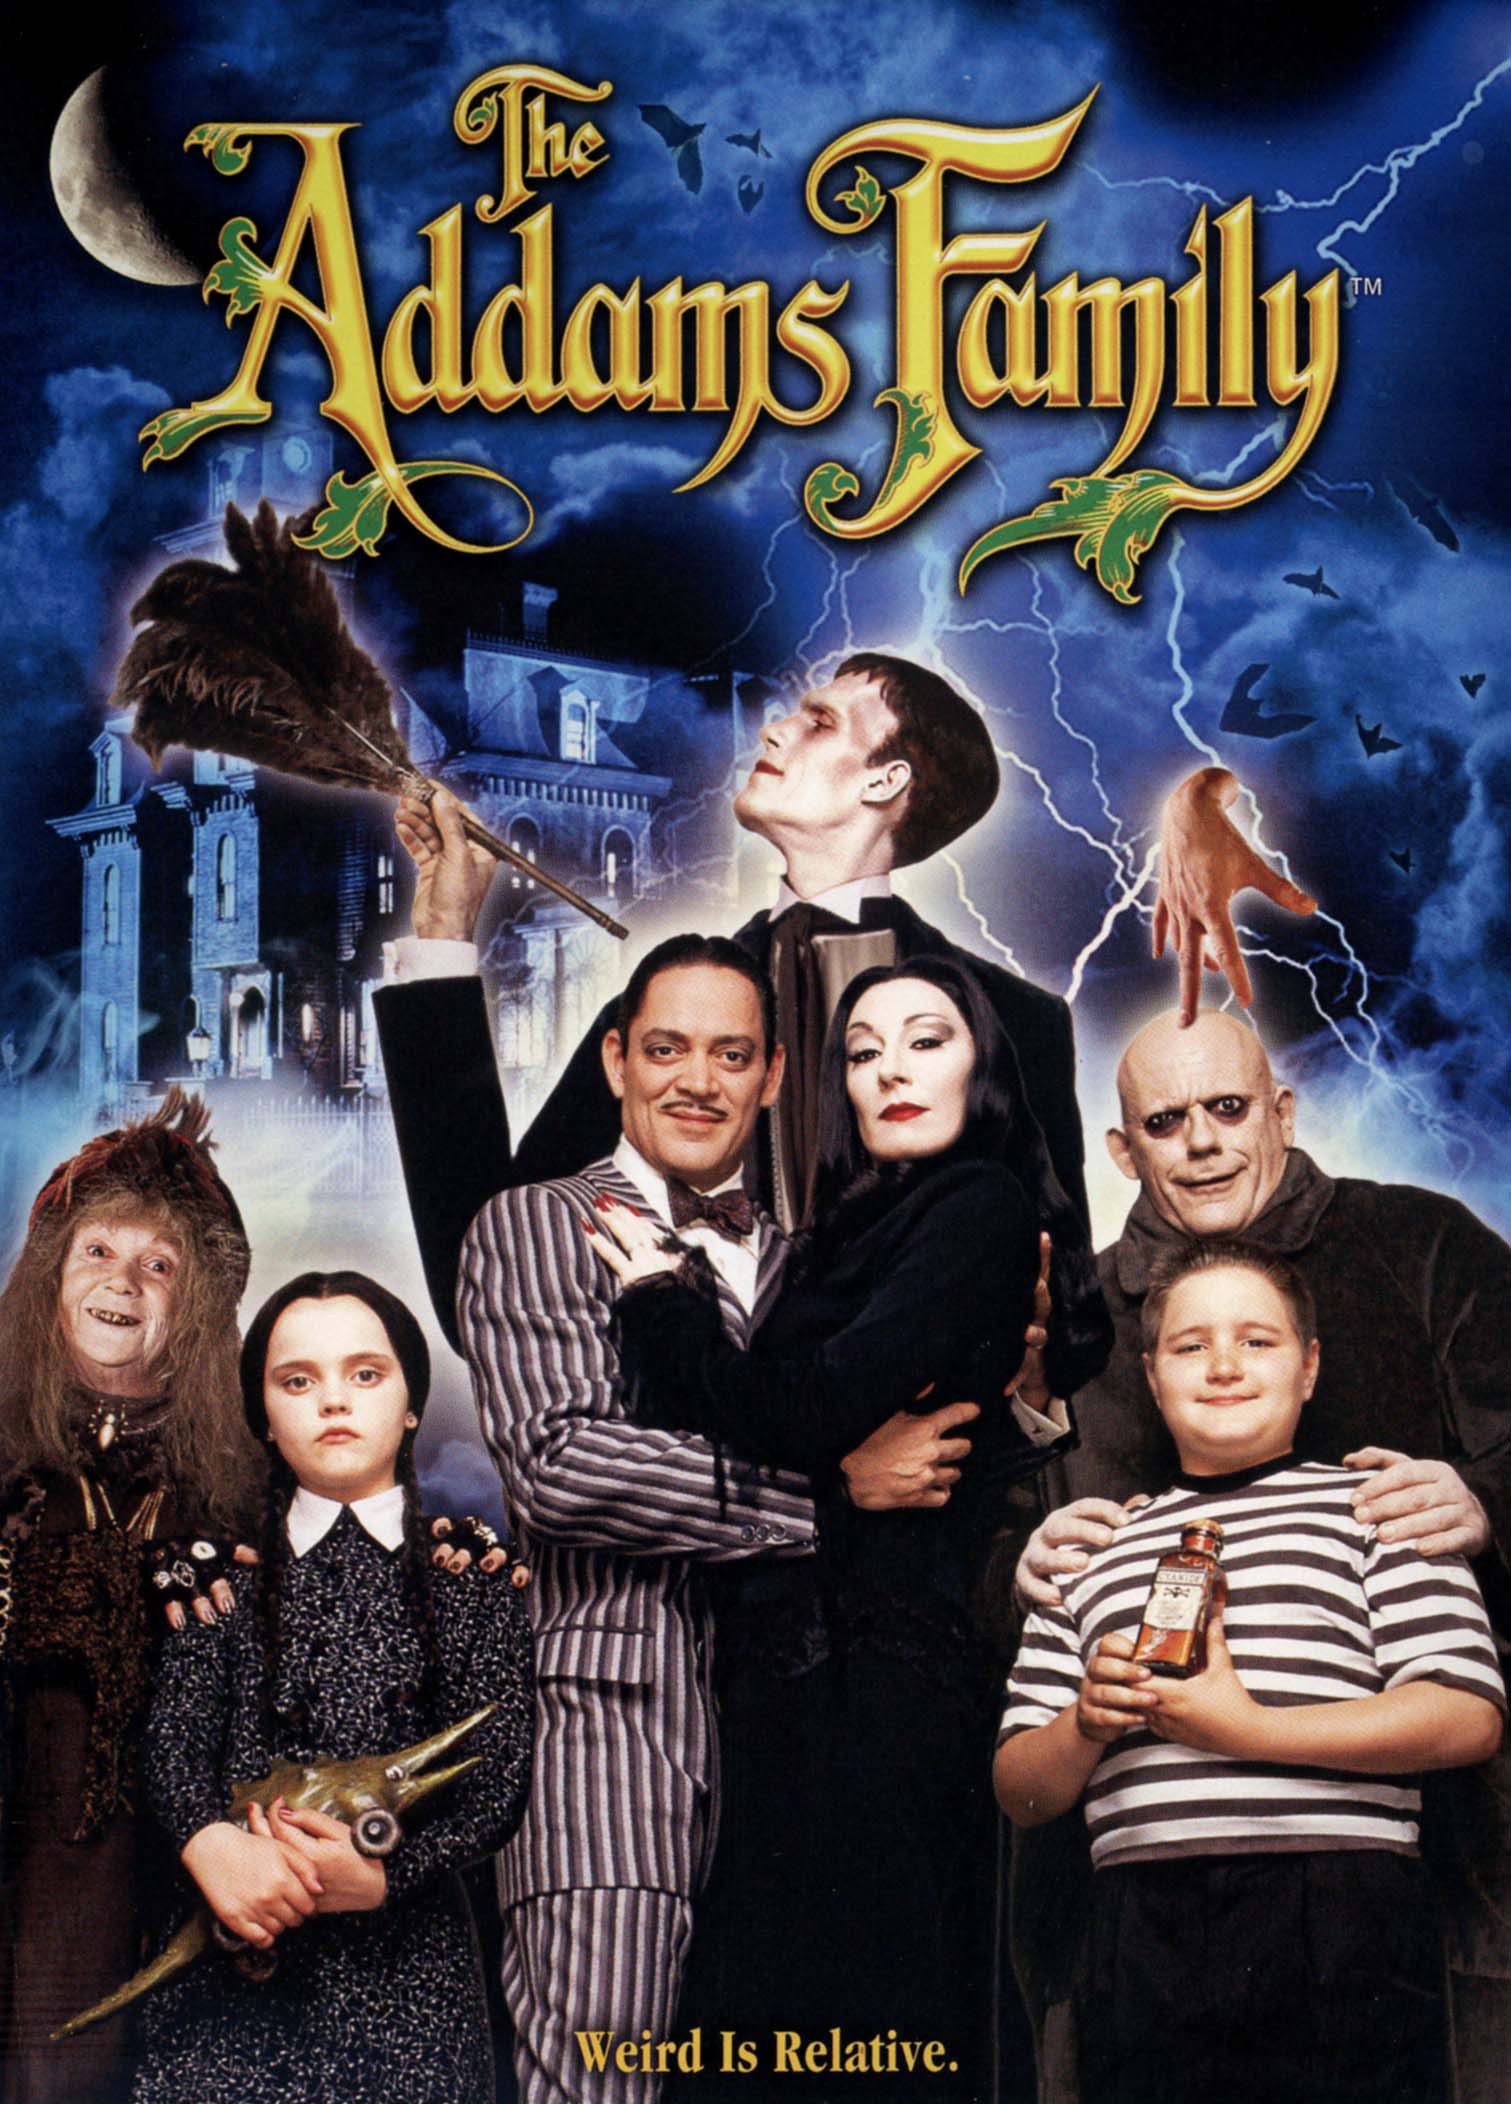 Addams Family cover art